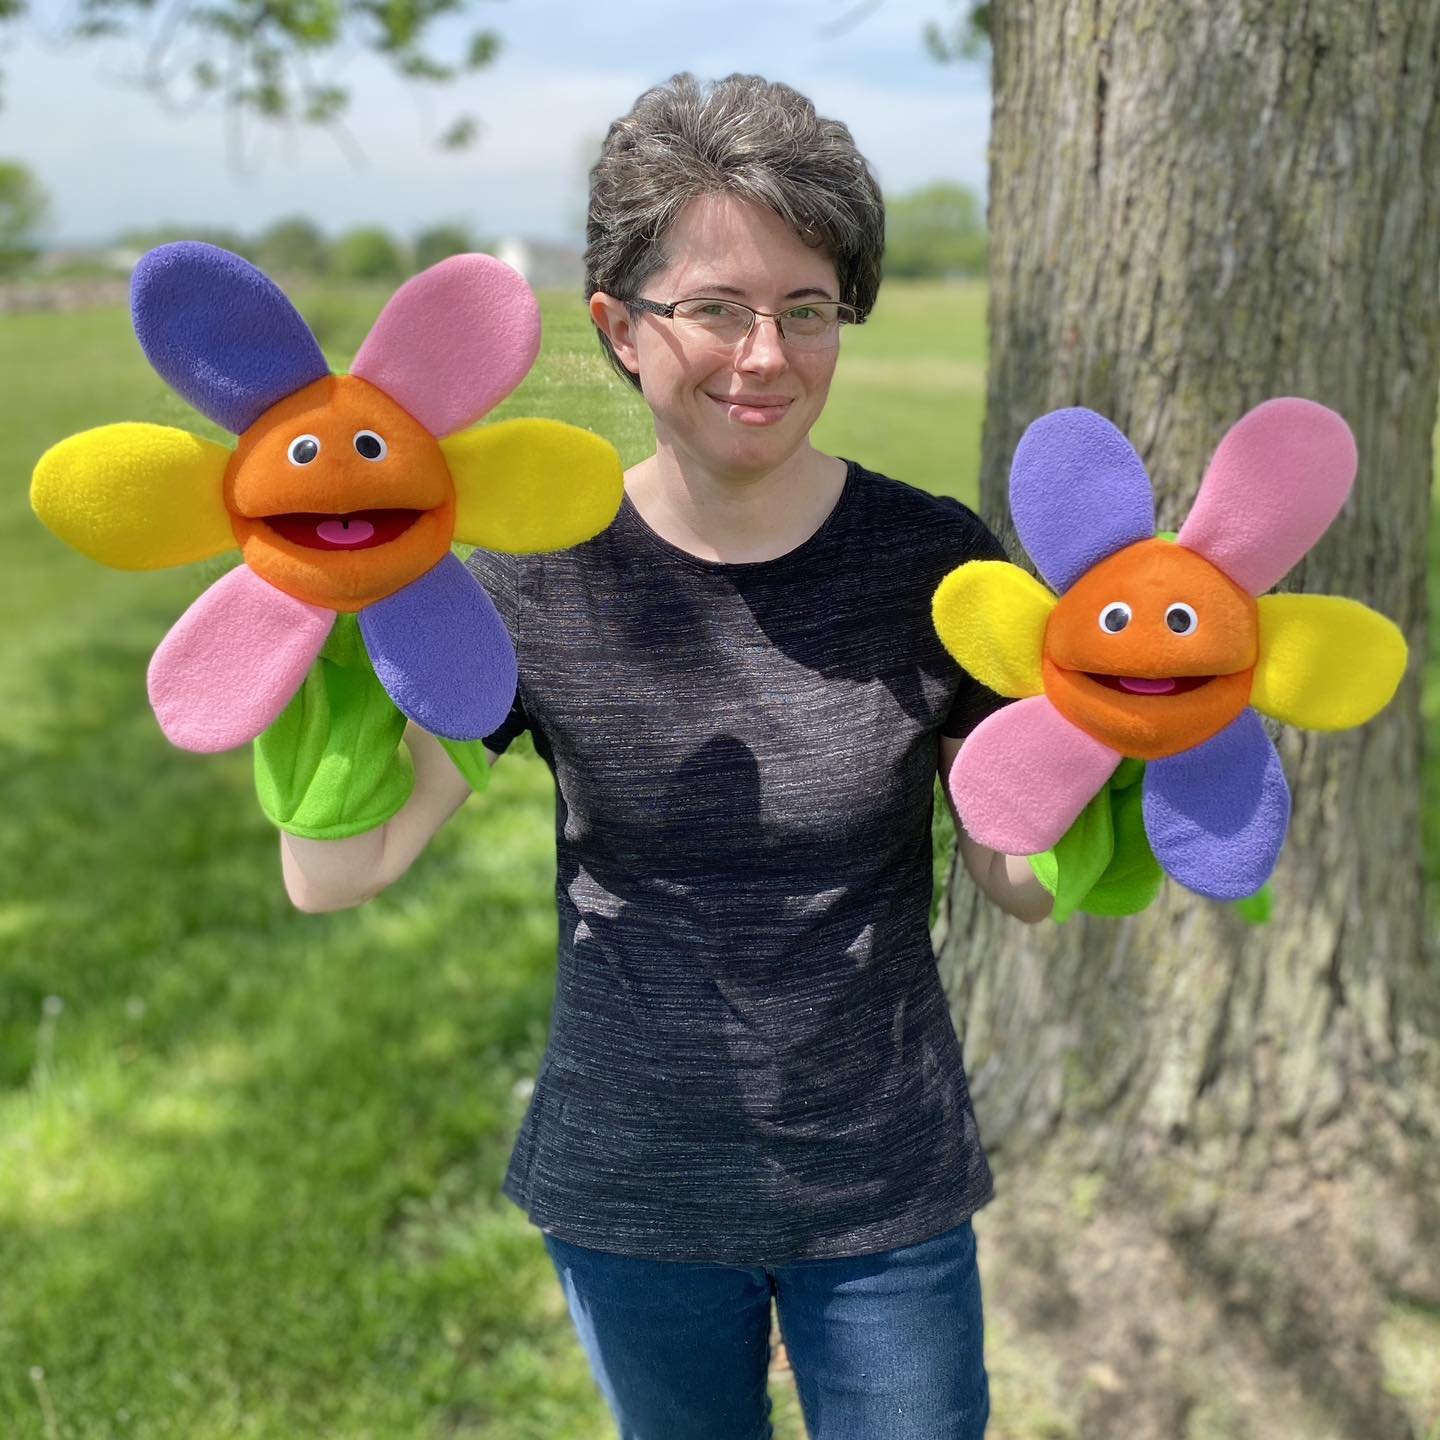 🌼 Spring is in the air at One Way Squared! 🌼

Our Fancy Flower puppet is 20&rdquo; tall and is sure to brighten up any performance! The petals are floppy and long enough to be held in the puppet's mouth, allowing the flower to &quot;bloom&quot; in 